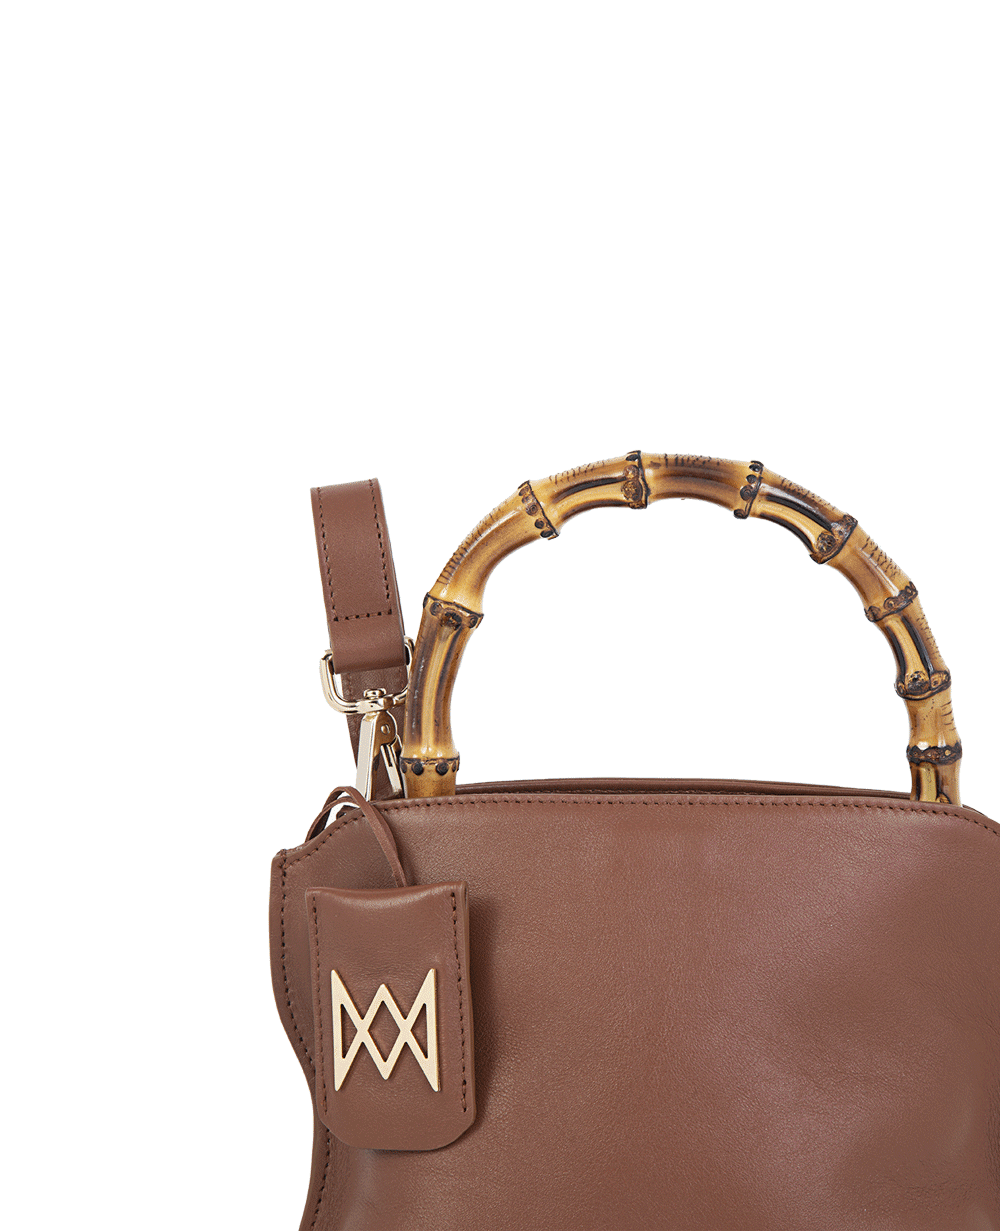 Cross-body bag in calf leather with detachable shoulder strap. Bamboo handles. Made In Italy. Two compartments, zip pocket in the back compartment. Magnetic flap closure with logo. Color: Mocha. Size: Medium 